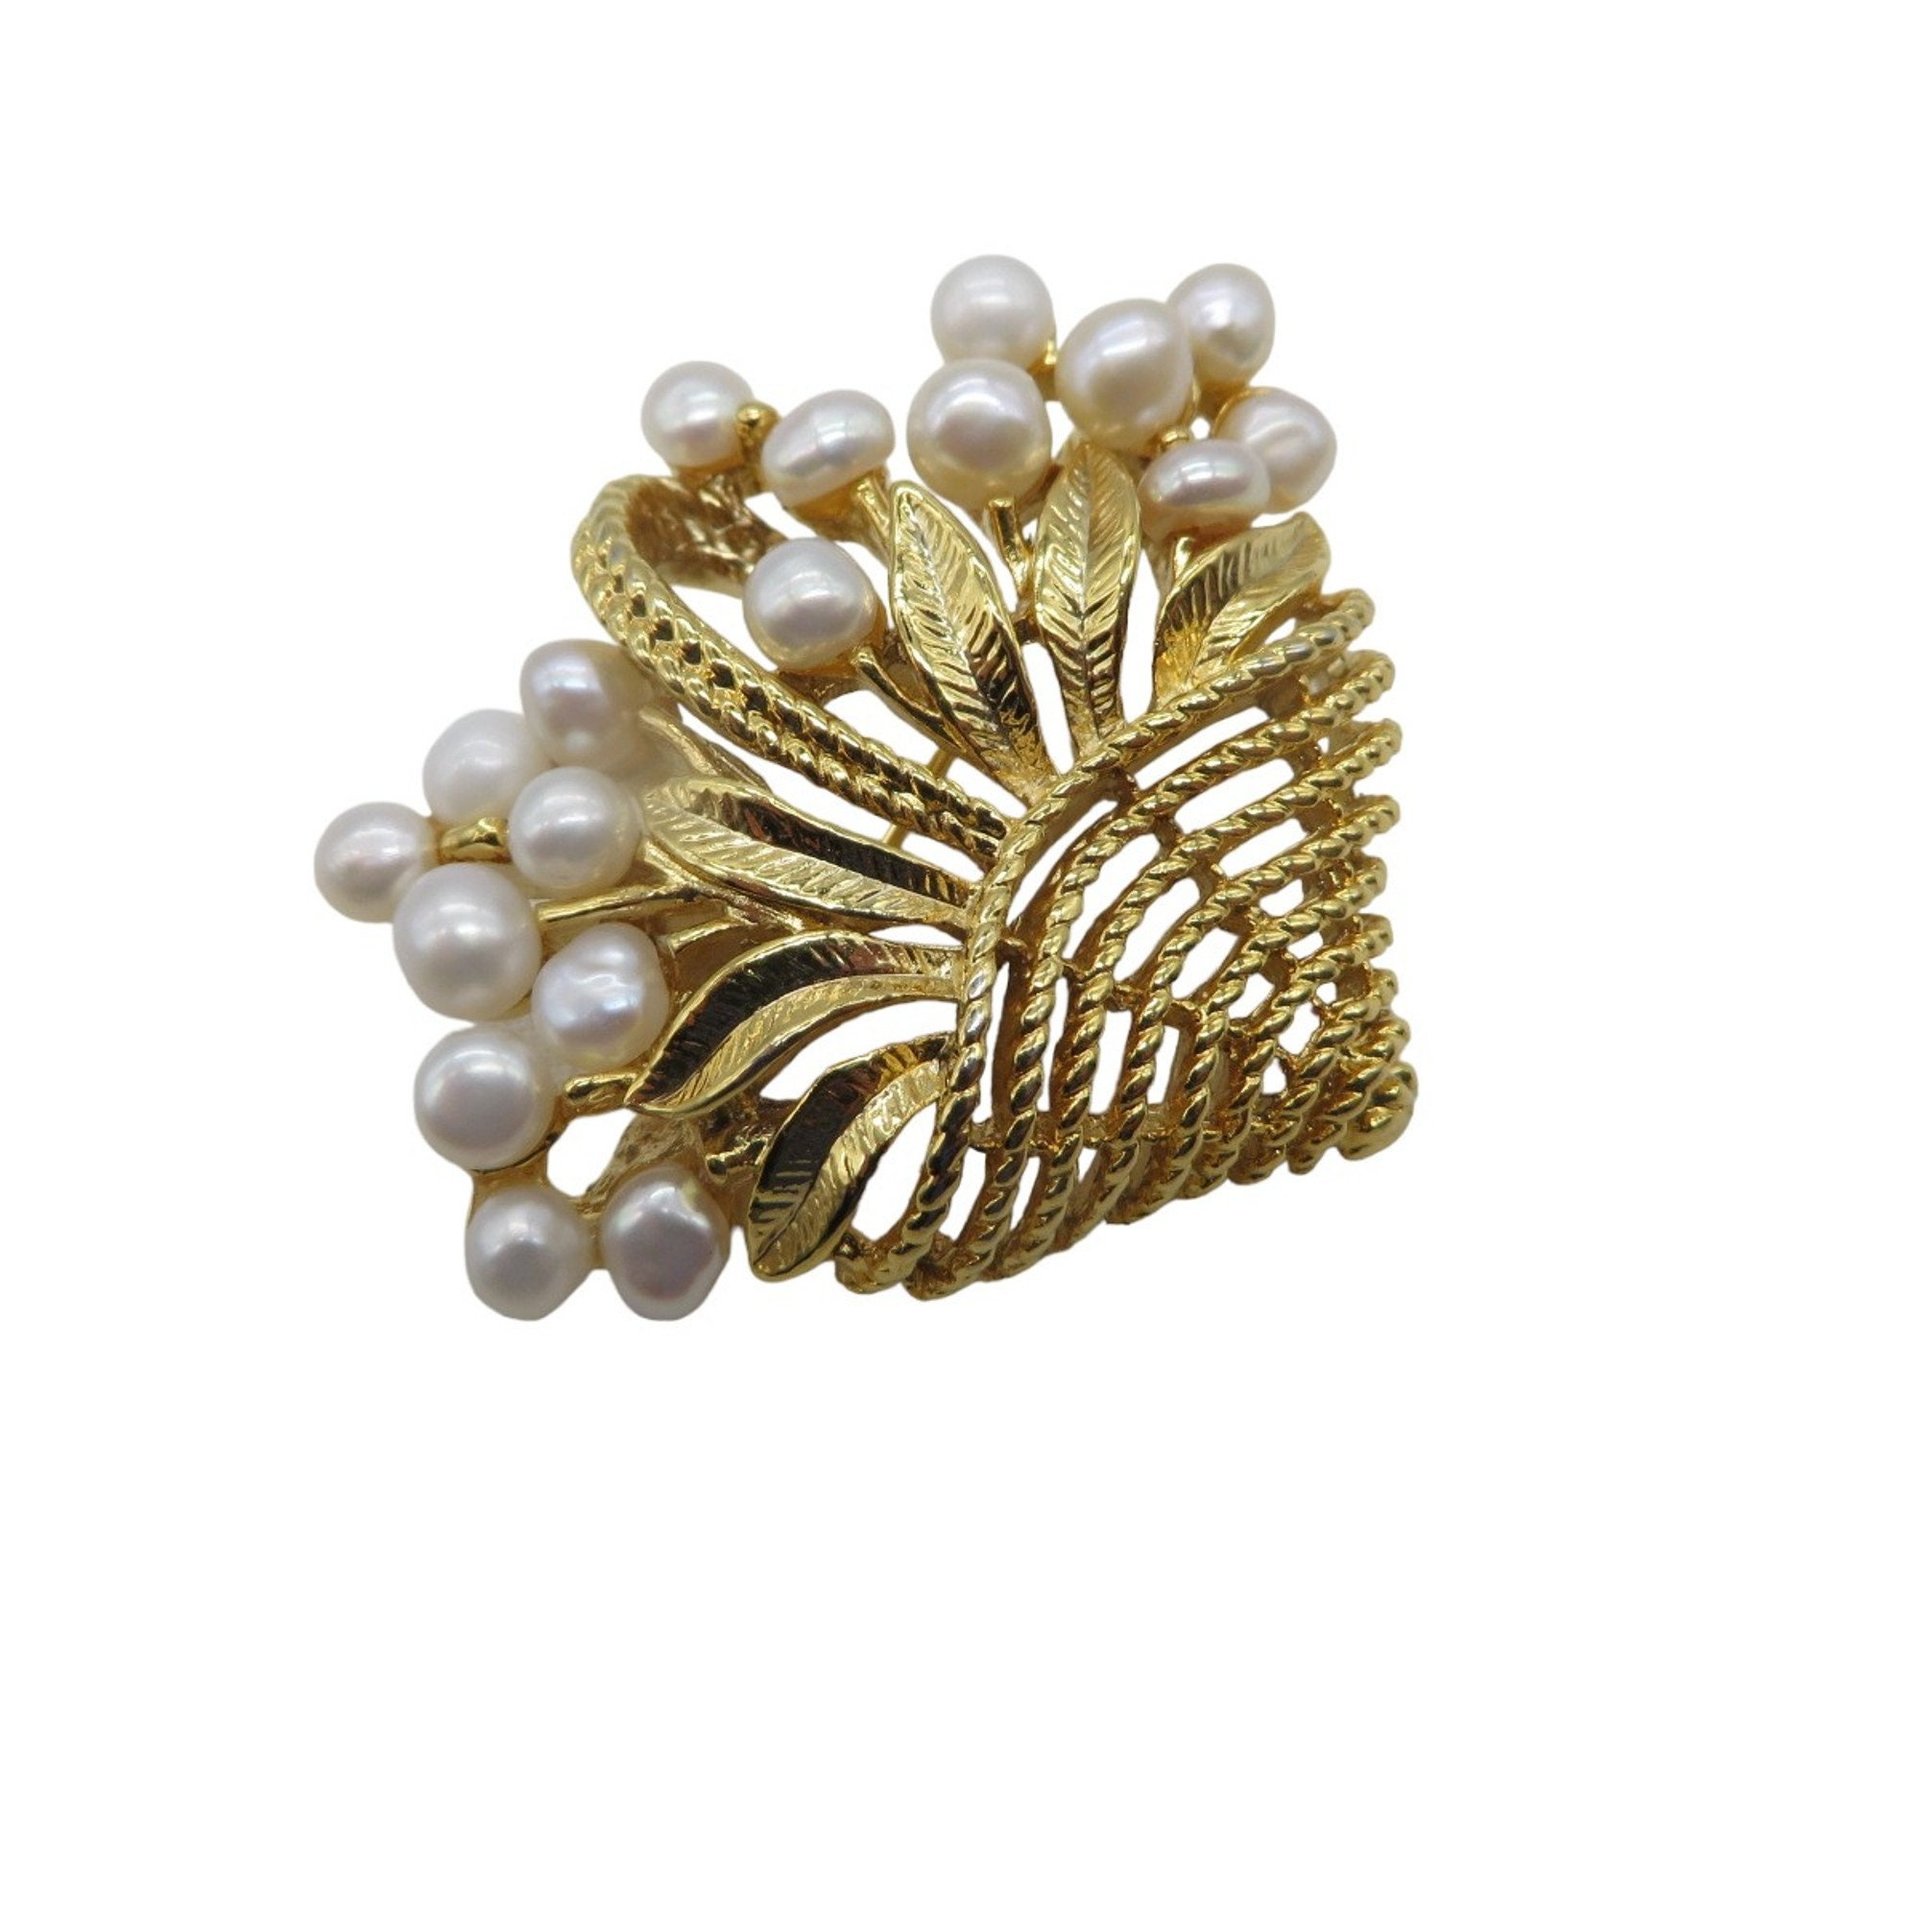 Flower Basket with Faux Pearls Brooch Pendant 